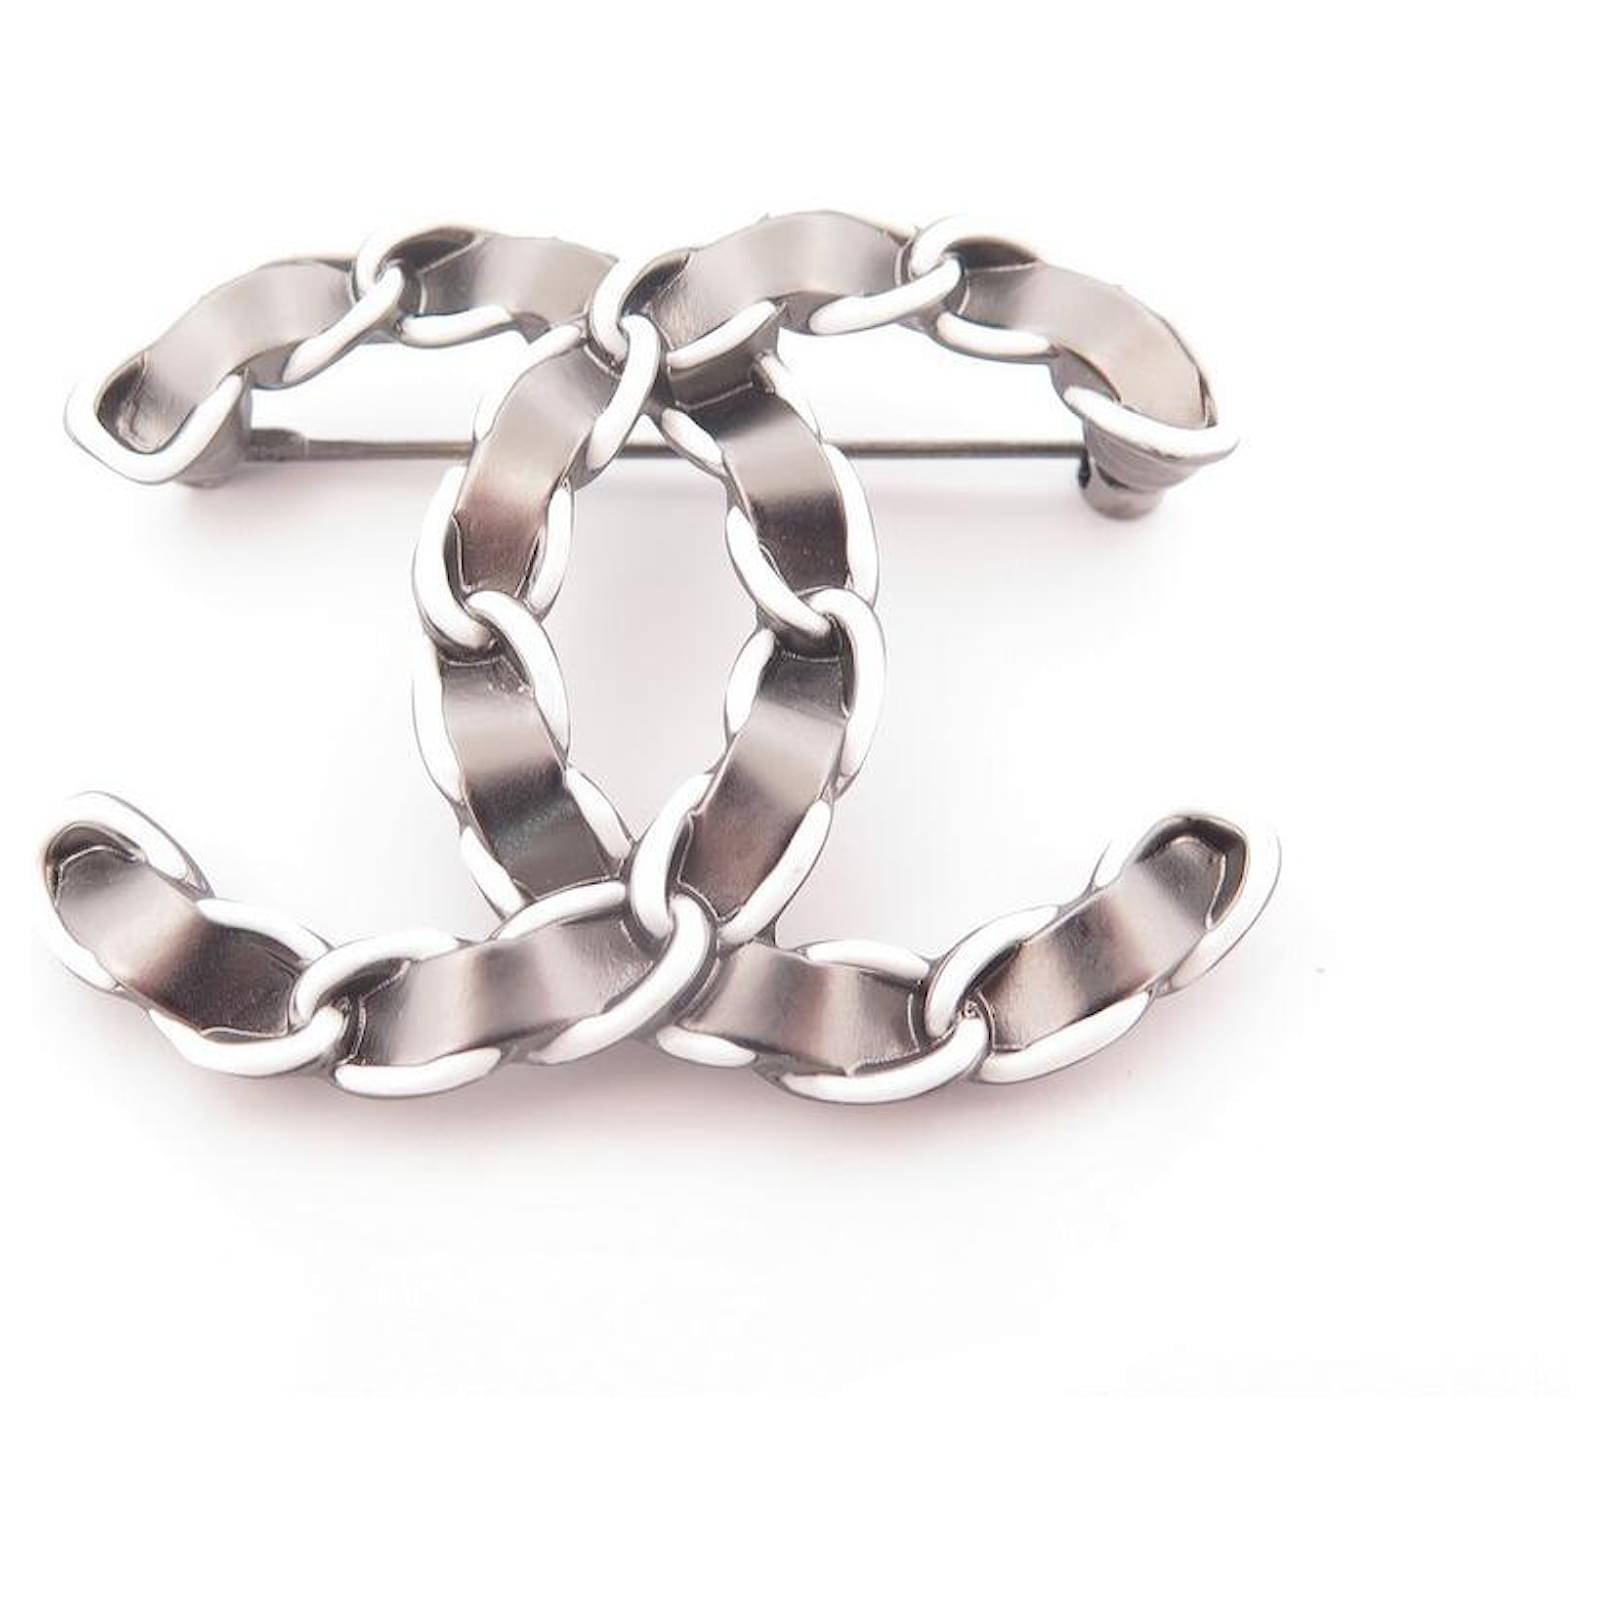 Other jewelry NEW CHANEL LOGO CC BROOCH IN GRAY AND SILVER METAL